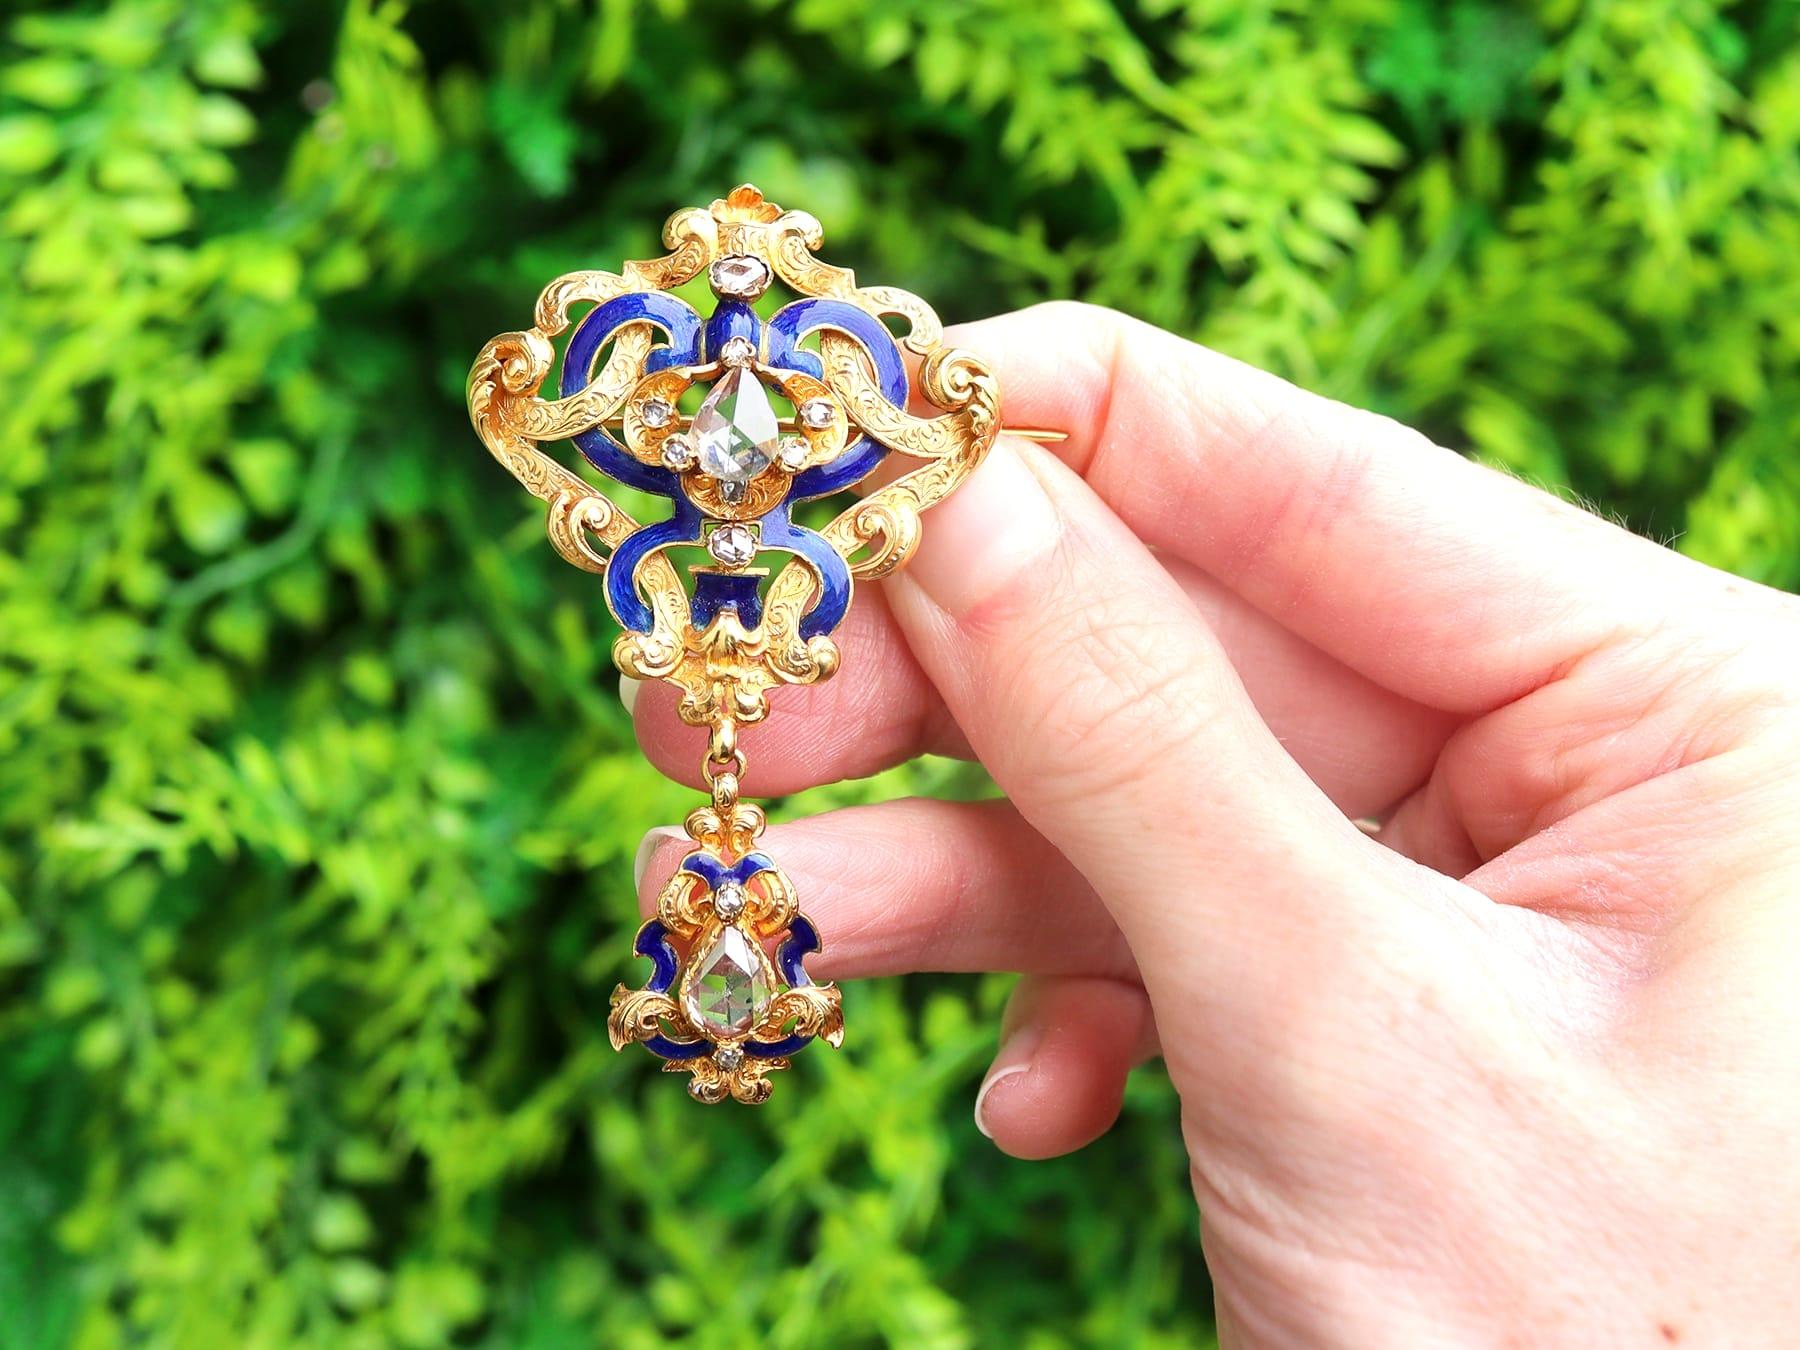 A stunning, fine and impressive, large antique Victorian 1.38 carat diamond, enamel and 21 karat yellow gold brooch; part of our diverse antique Victorian brooch collections.

This stunning, fine and impressive antique brooch has been crafted in 21k